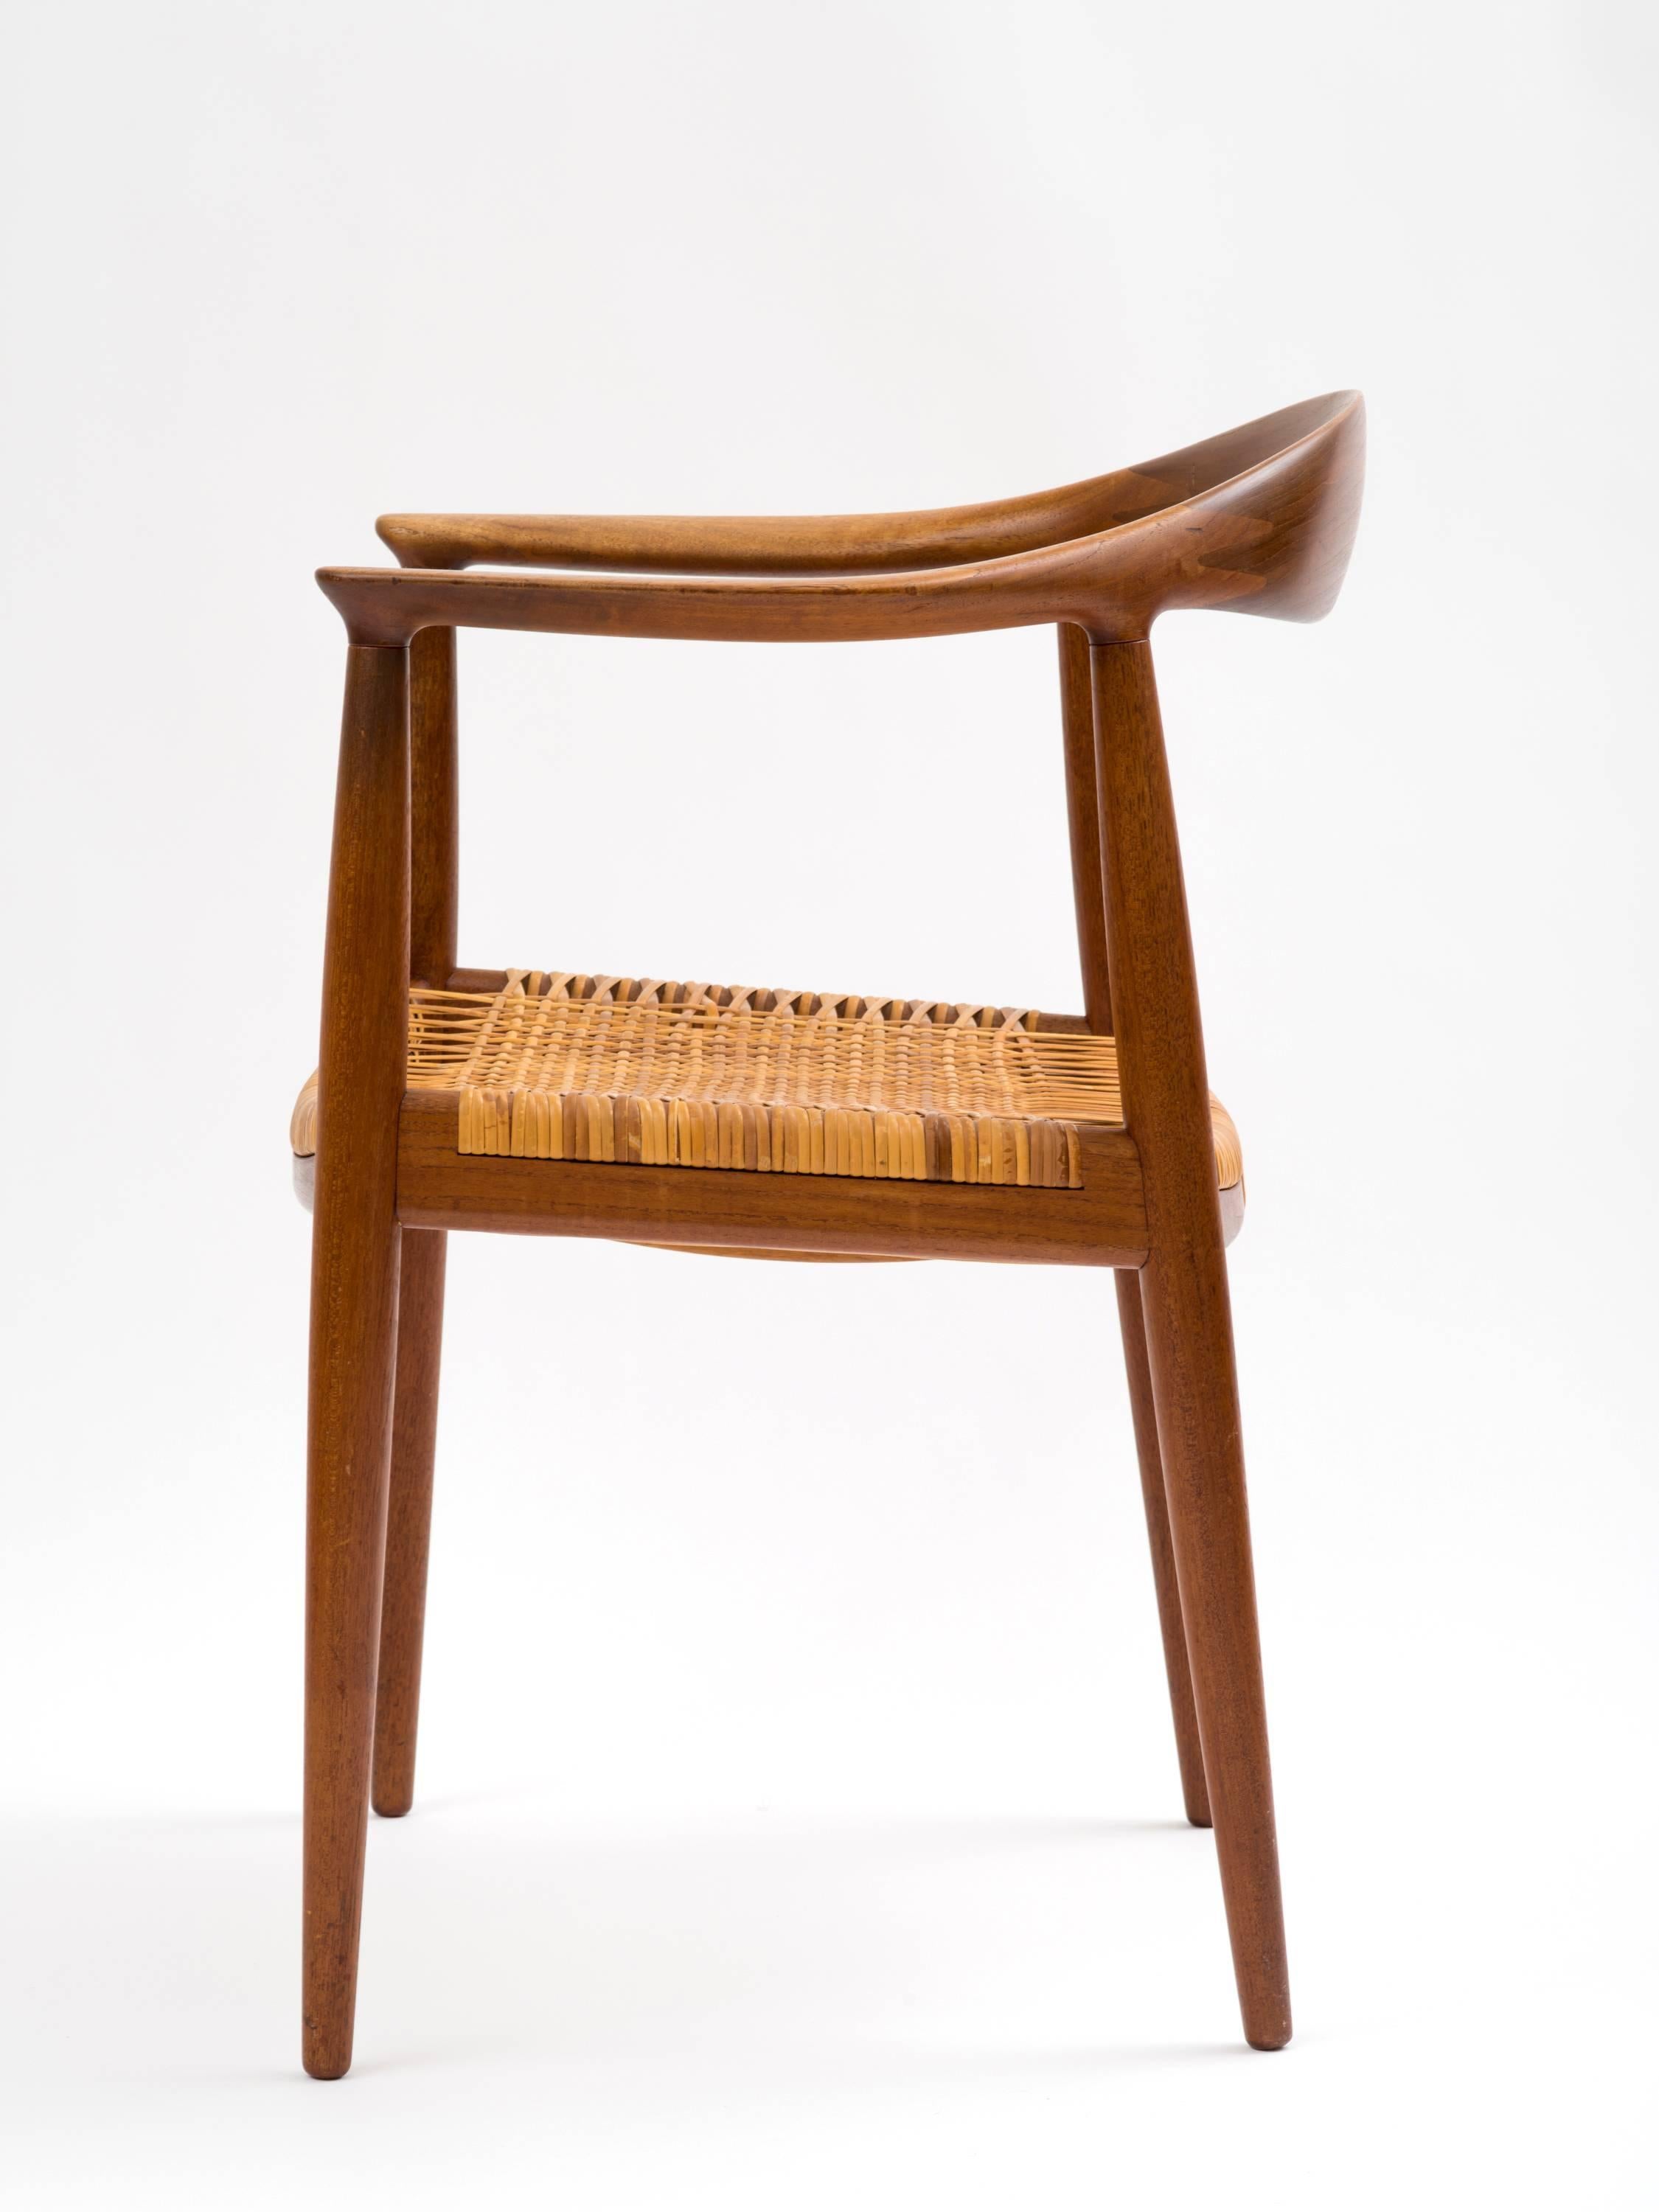 1940 caned cradle